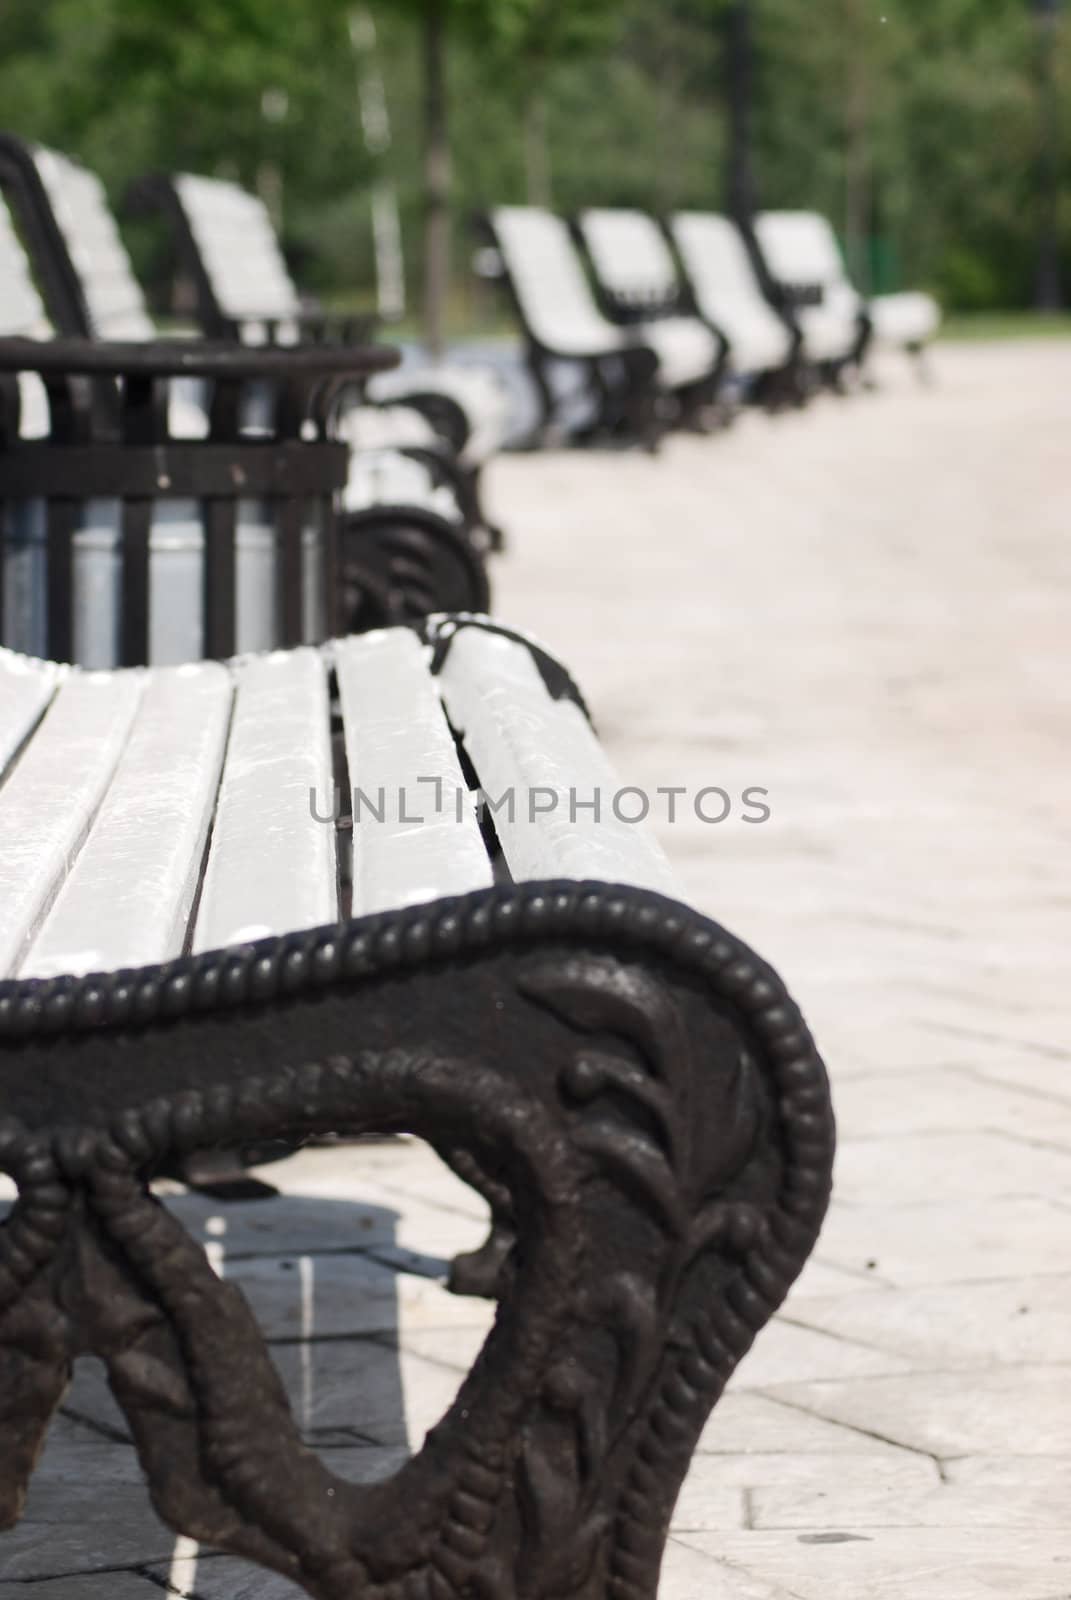 white benches in a park by svtrotof